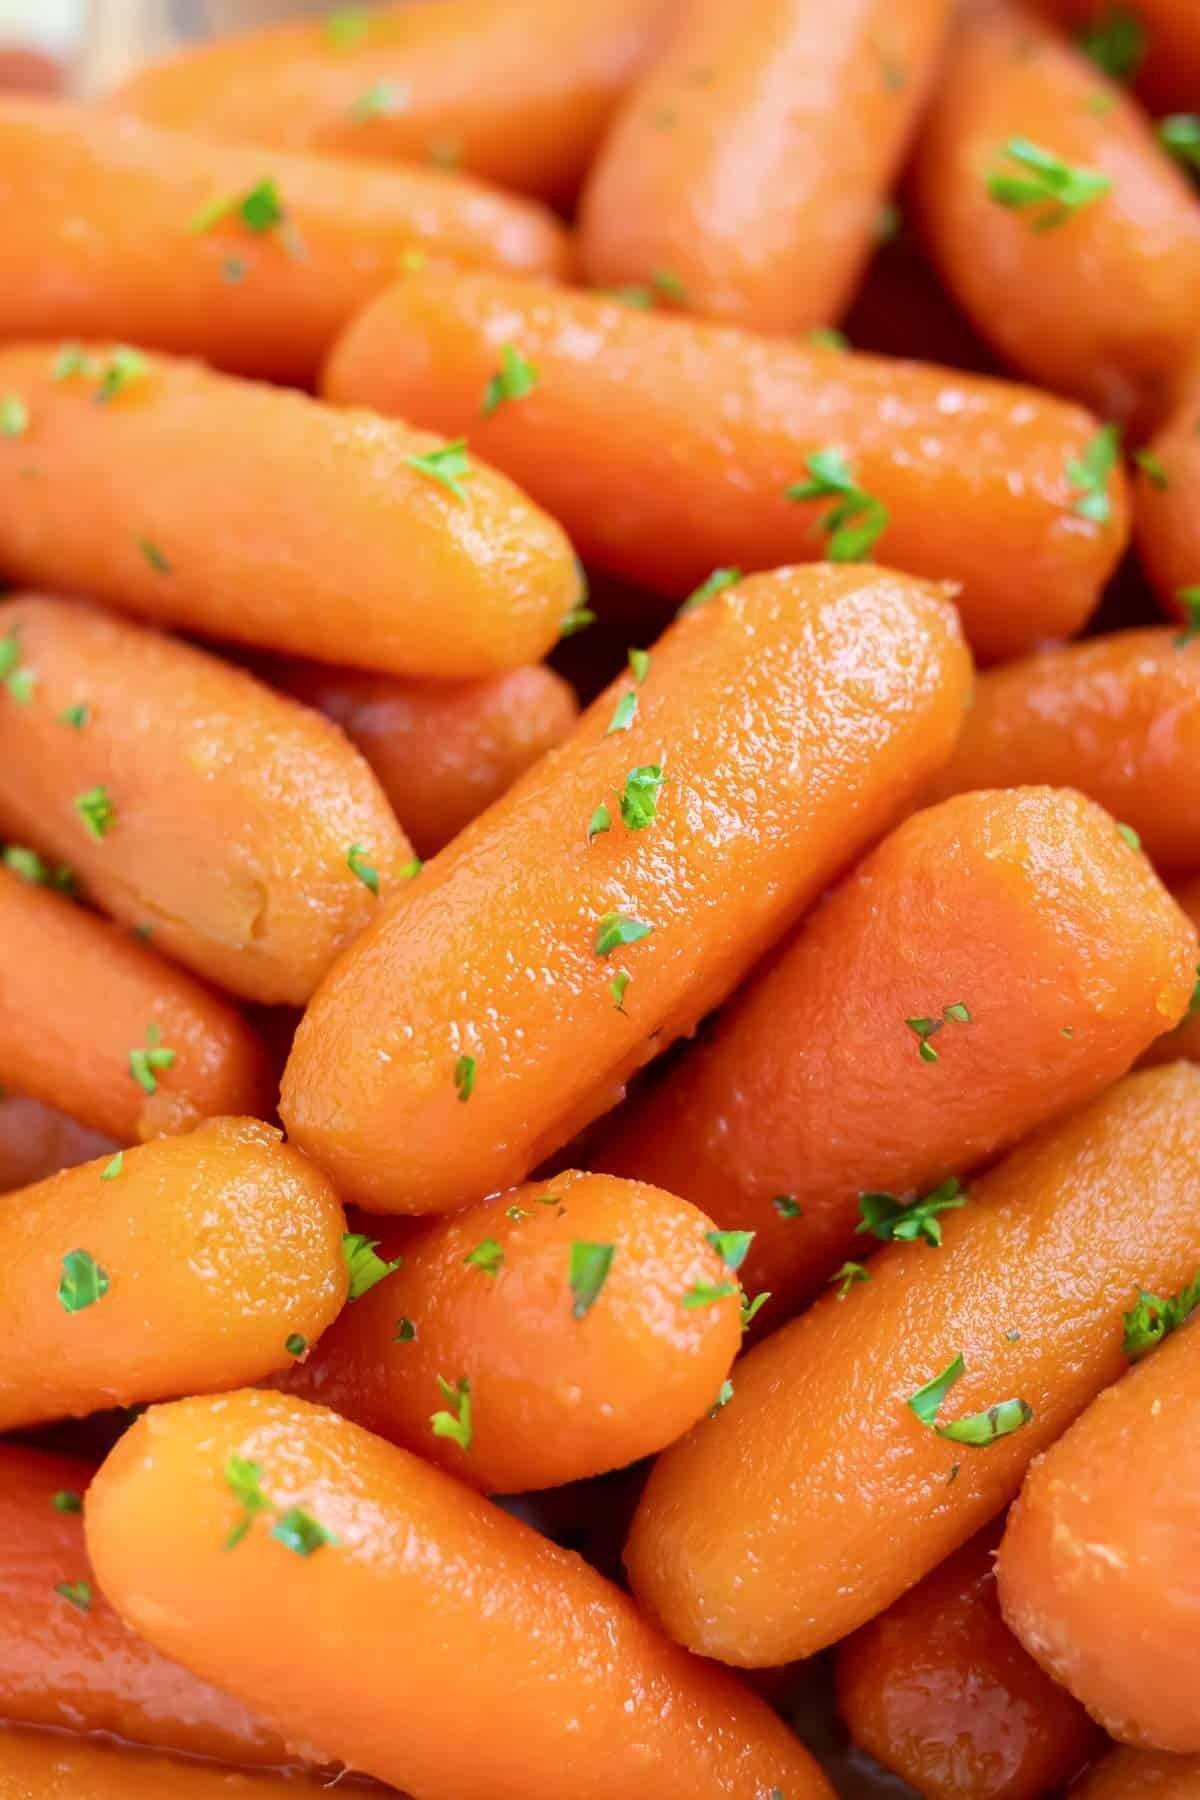 A close-up of baby carrots covered in a honey glaze with parsley sprinkled on top.